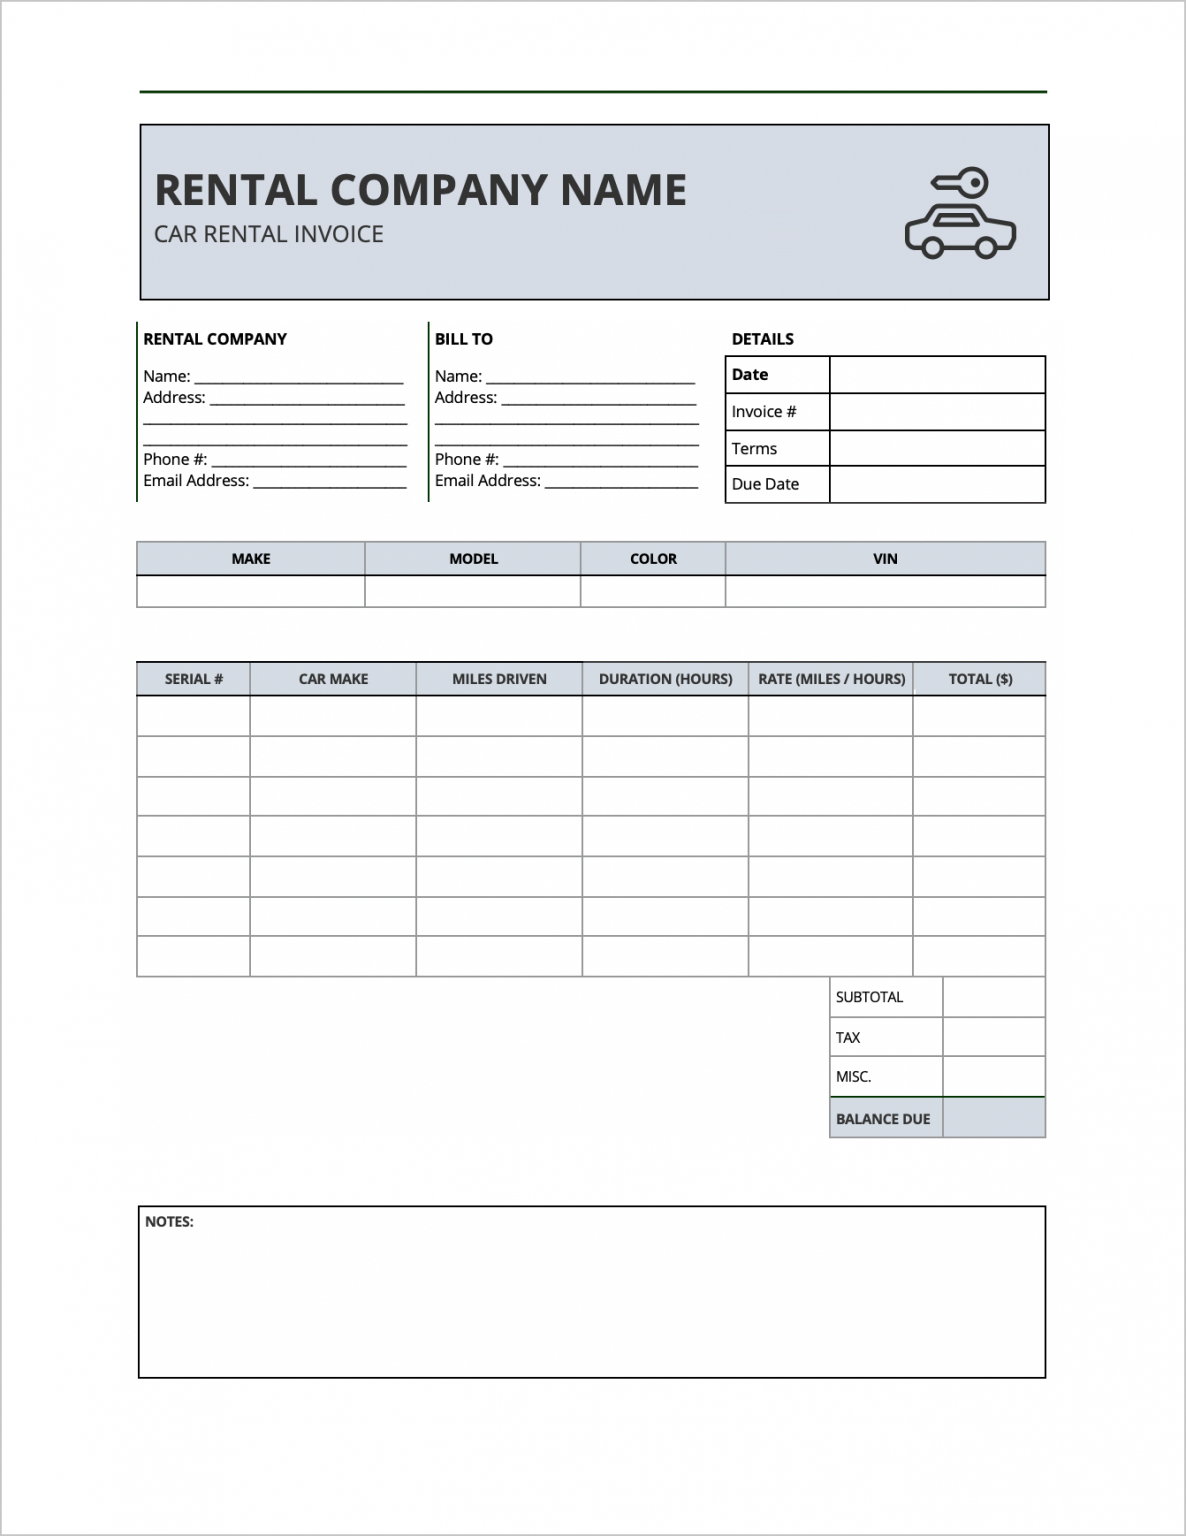 rent-invoice-template-free-download